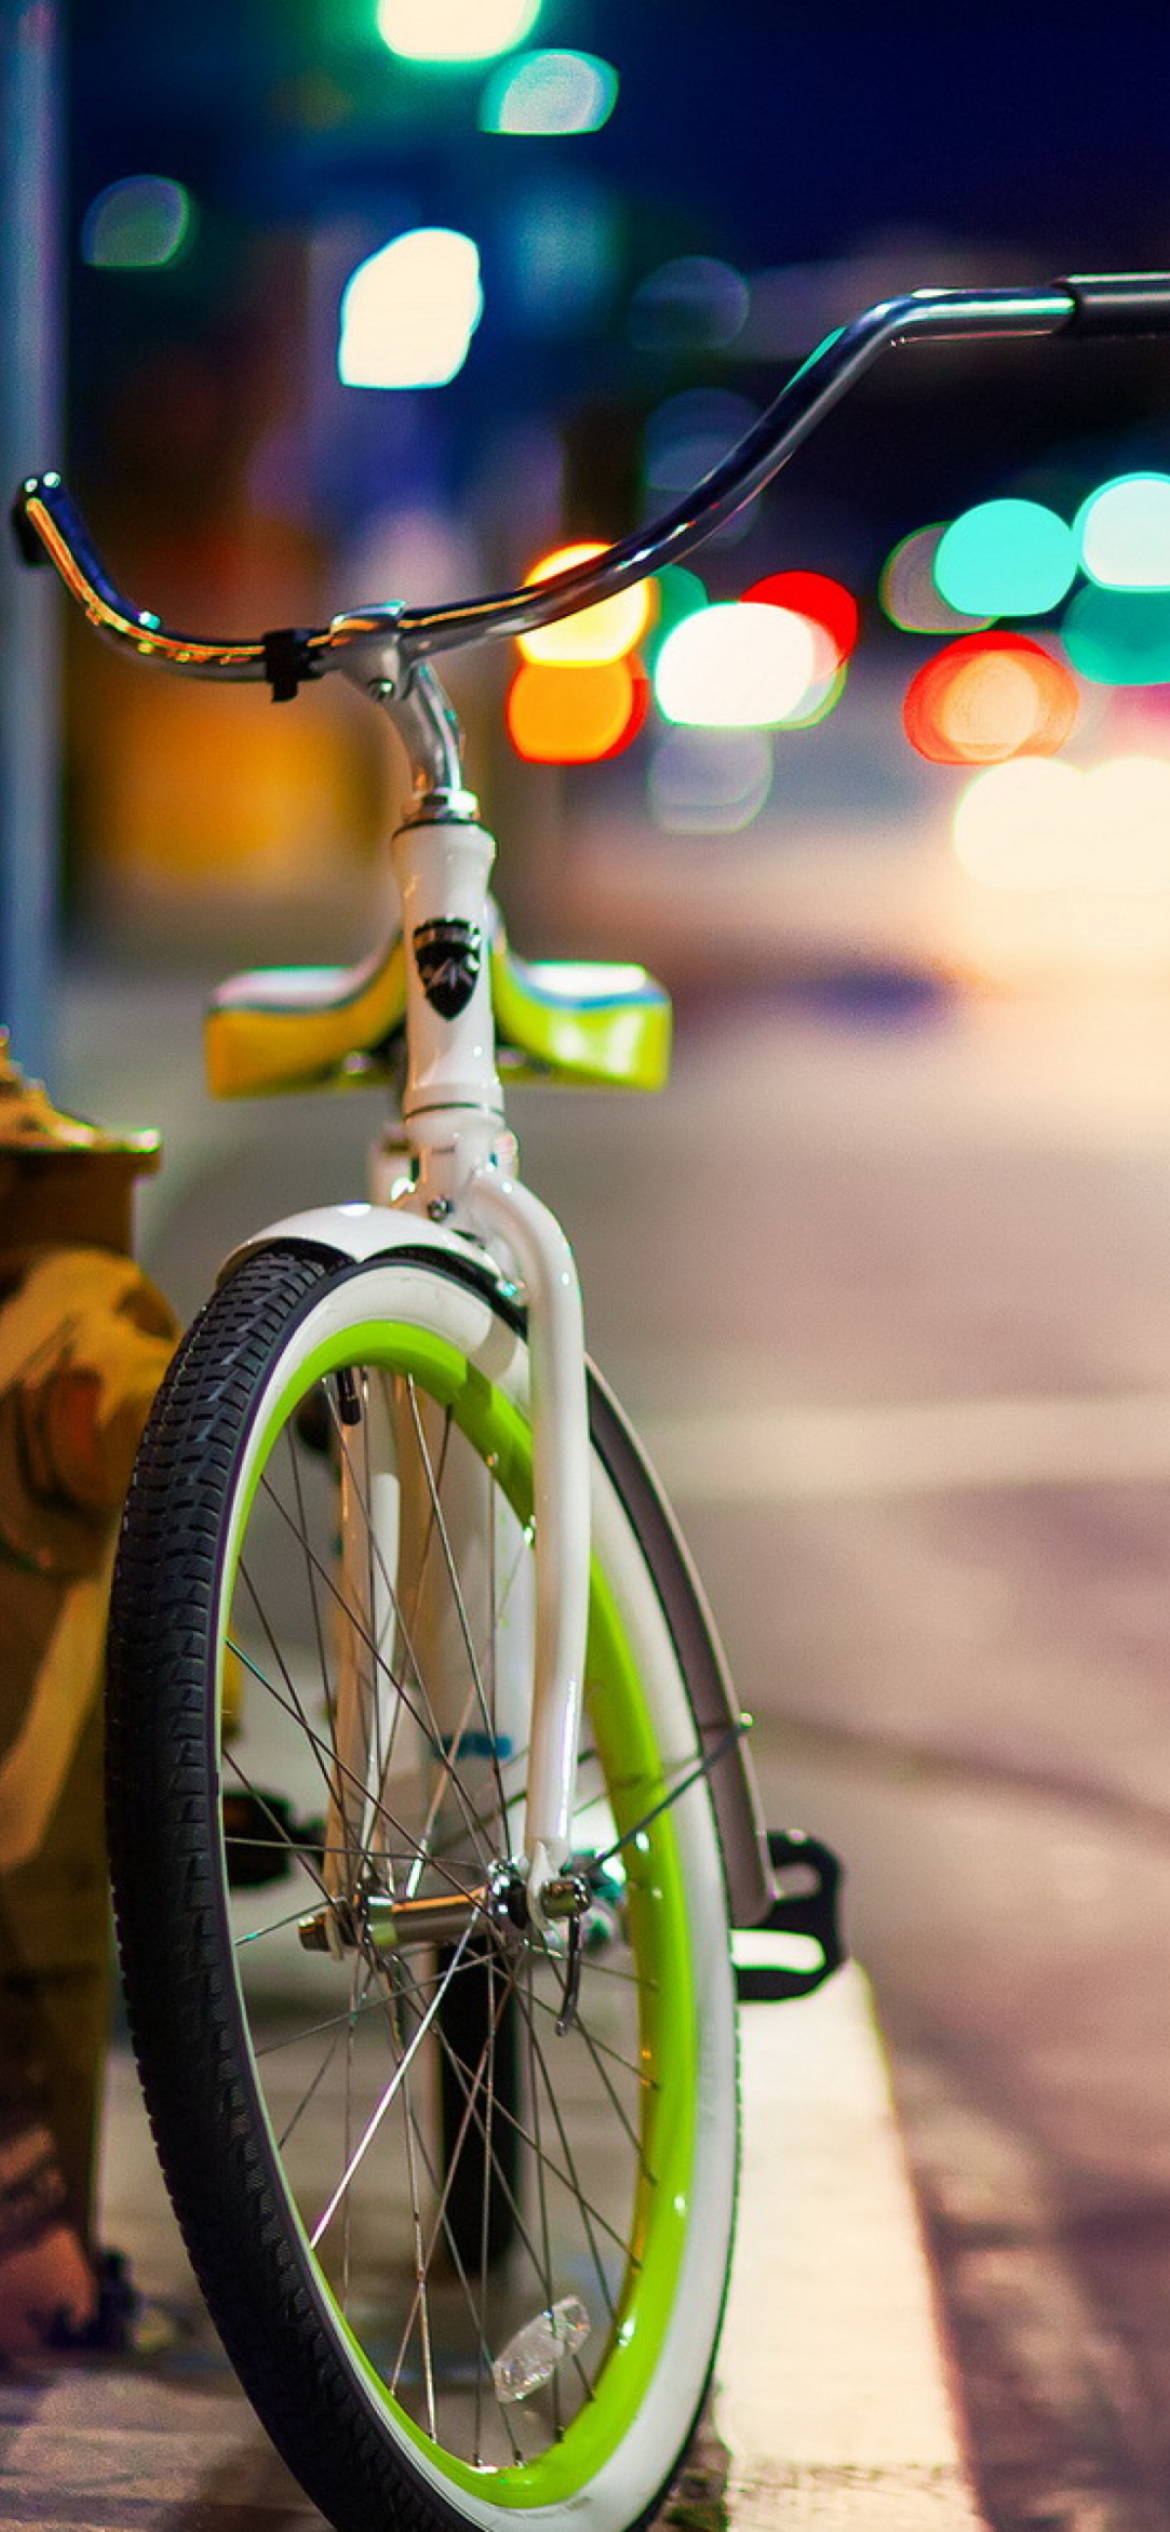 Green Bicycle In City Lights wallpaper 1170x2532